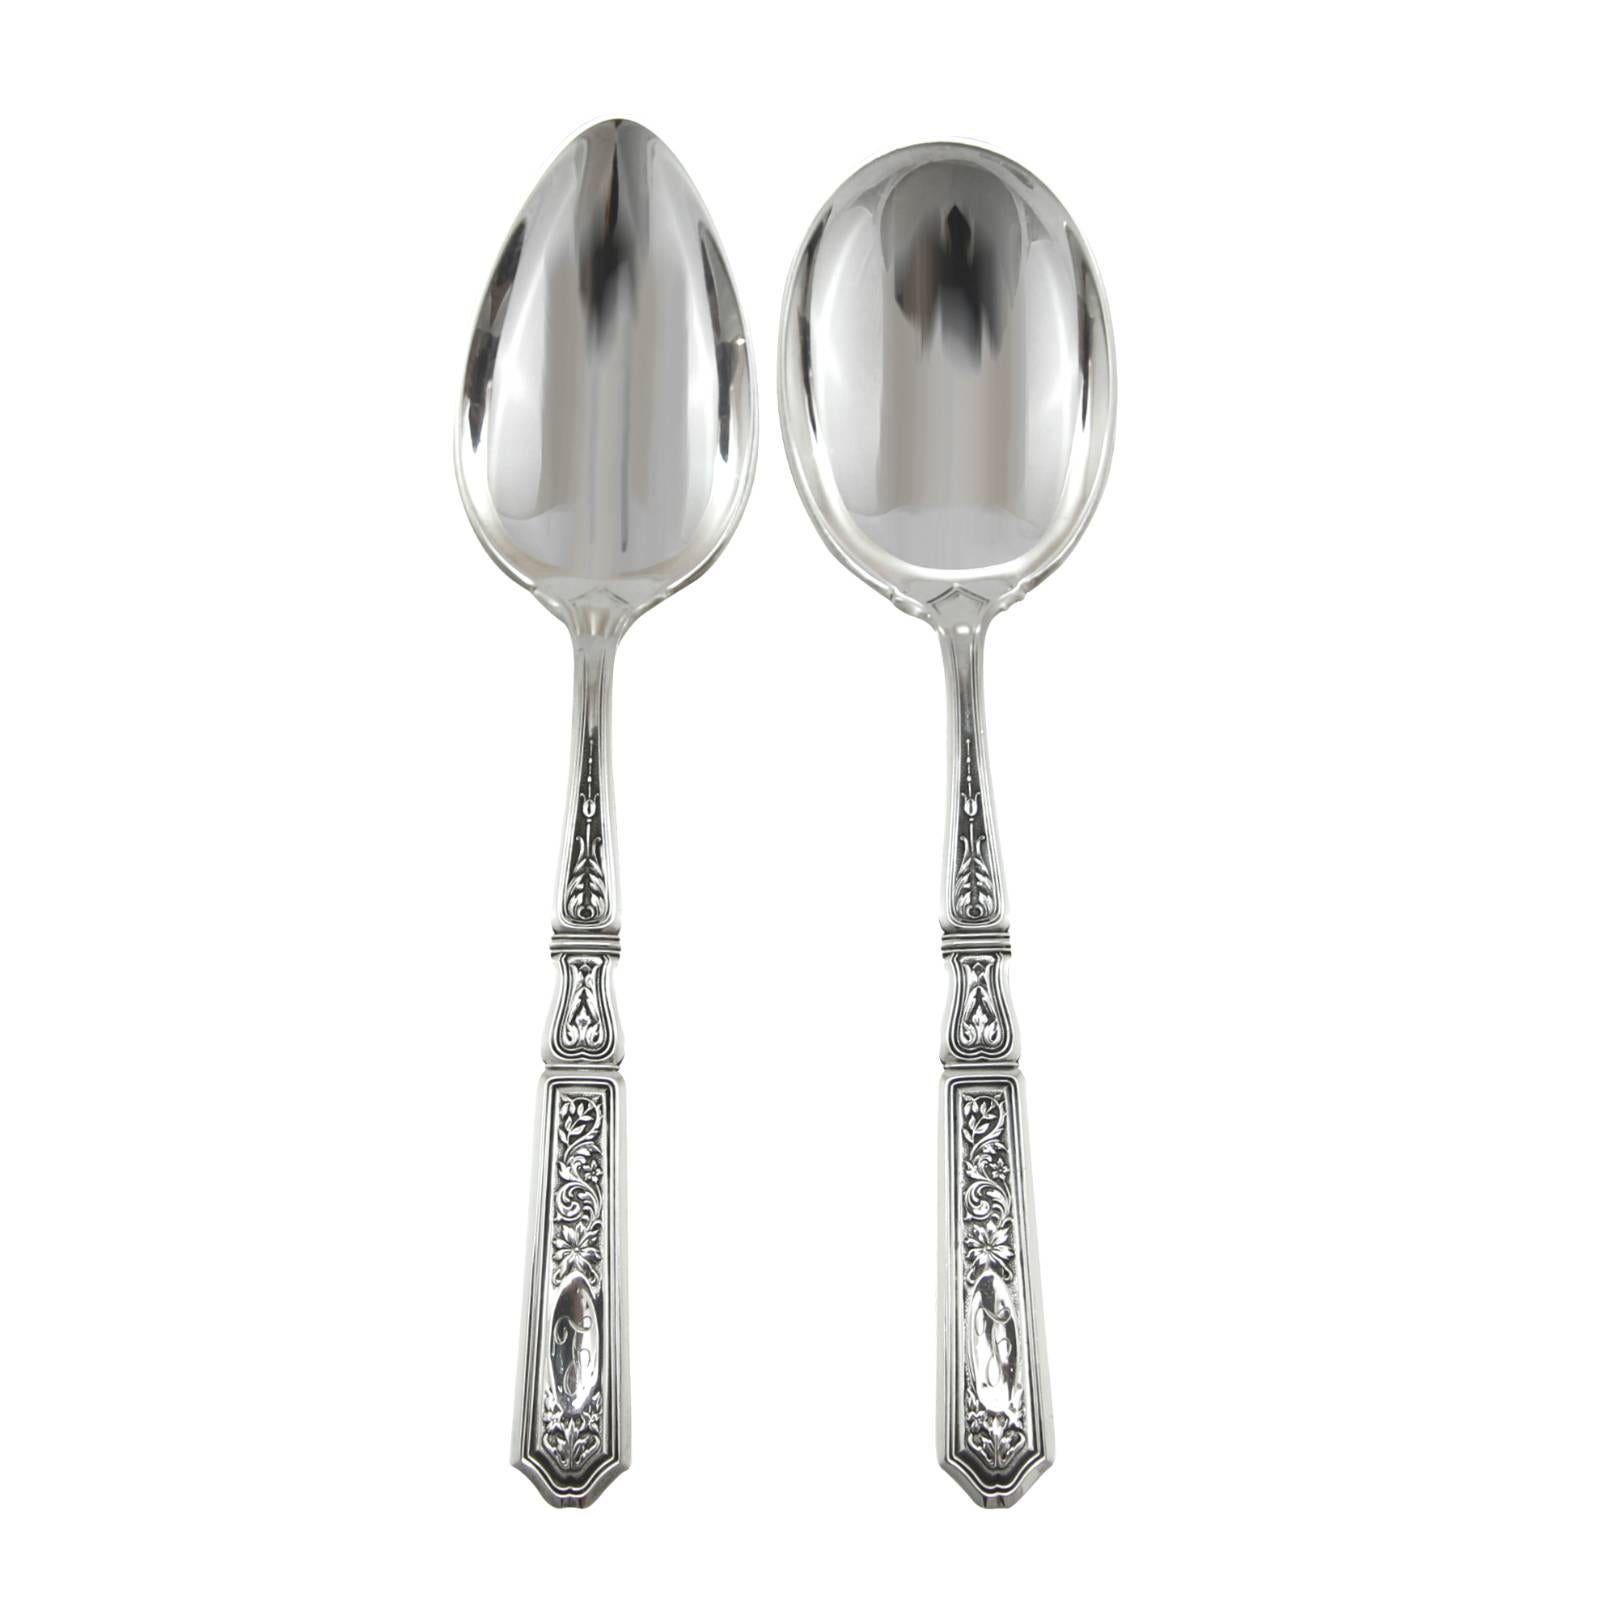 Modern 20th Century 'St Dunstan Chased' Sterling Silver Flatware Set by Gorham For Sale